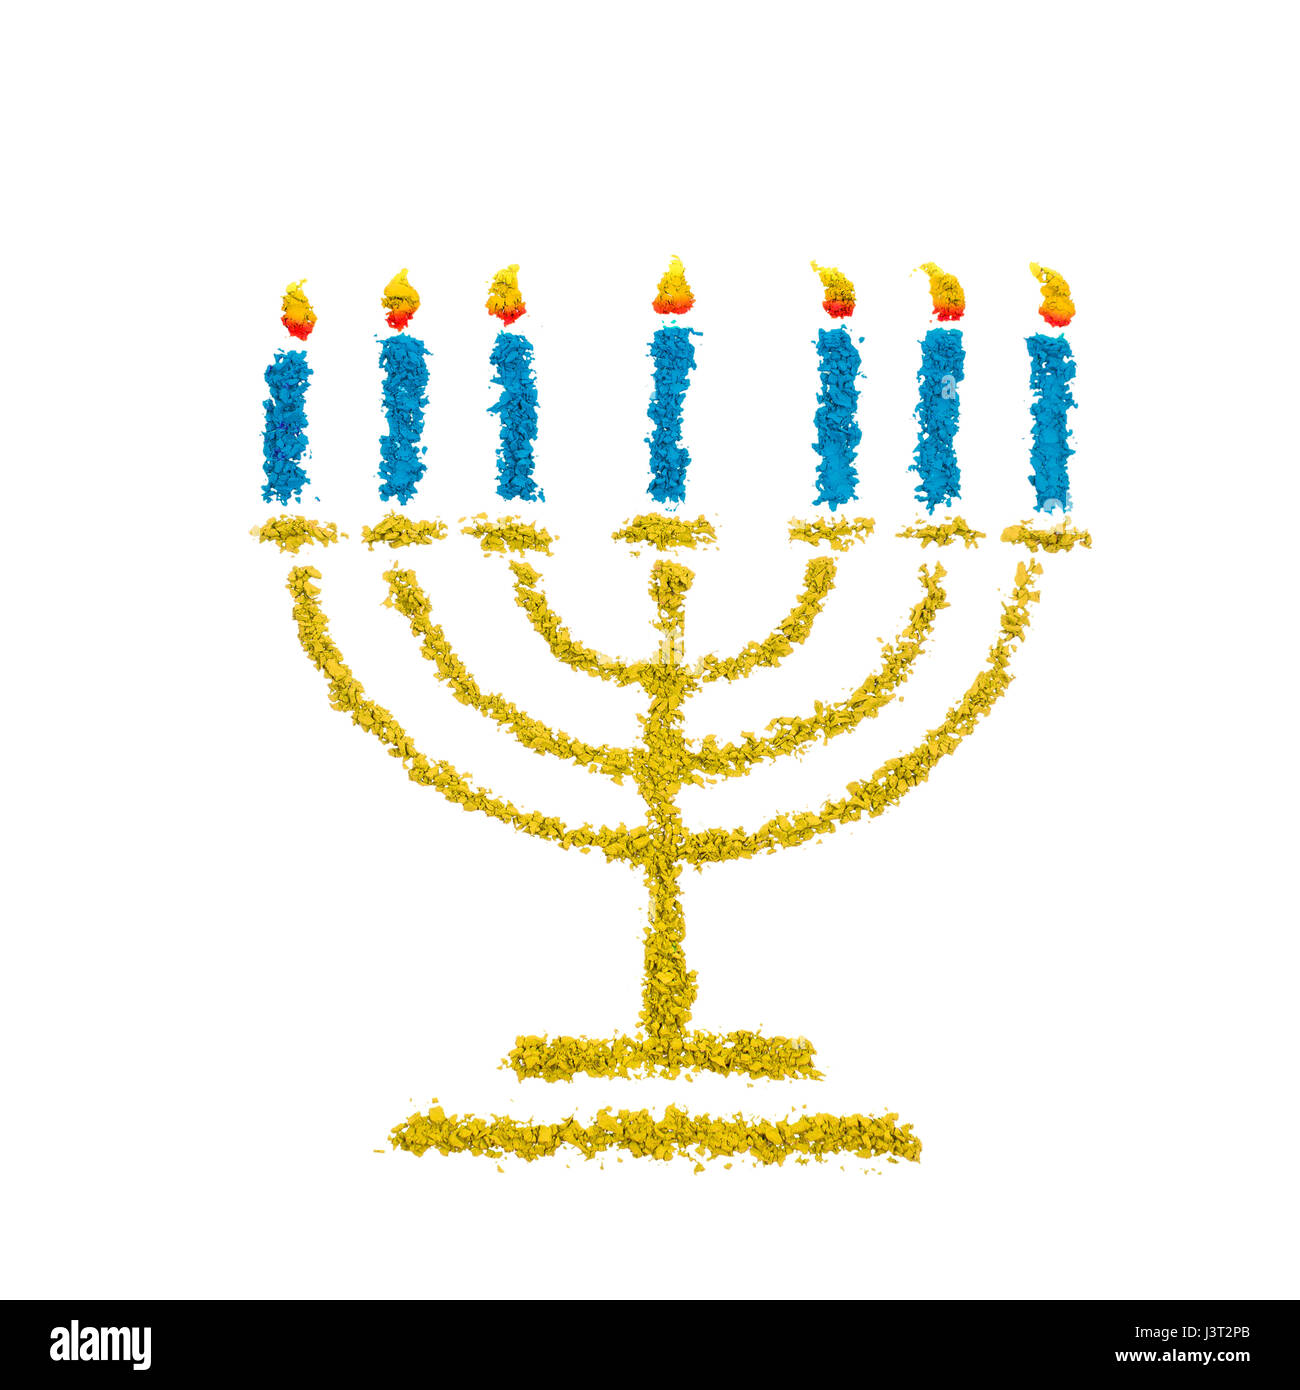 Jewish Hanukkah Menorah symbol made with color powder, isolated on a white background Stock Photo